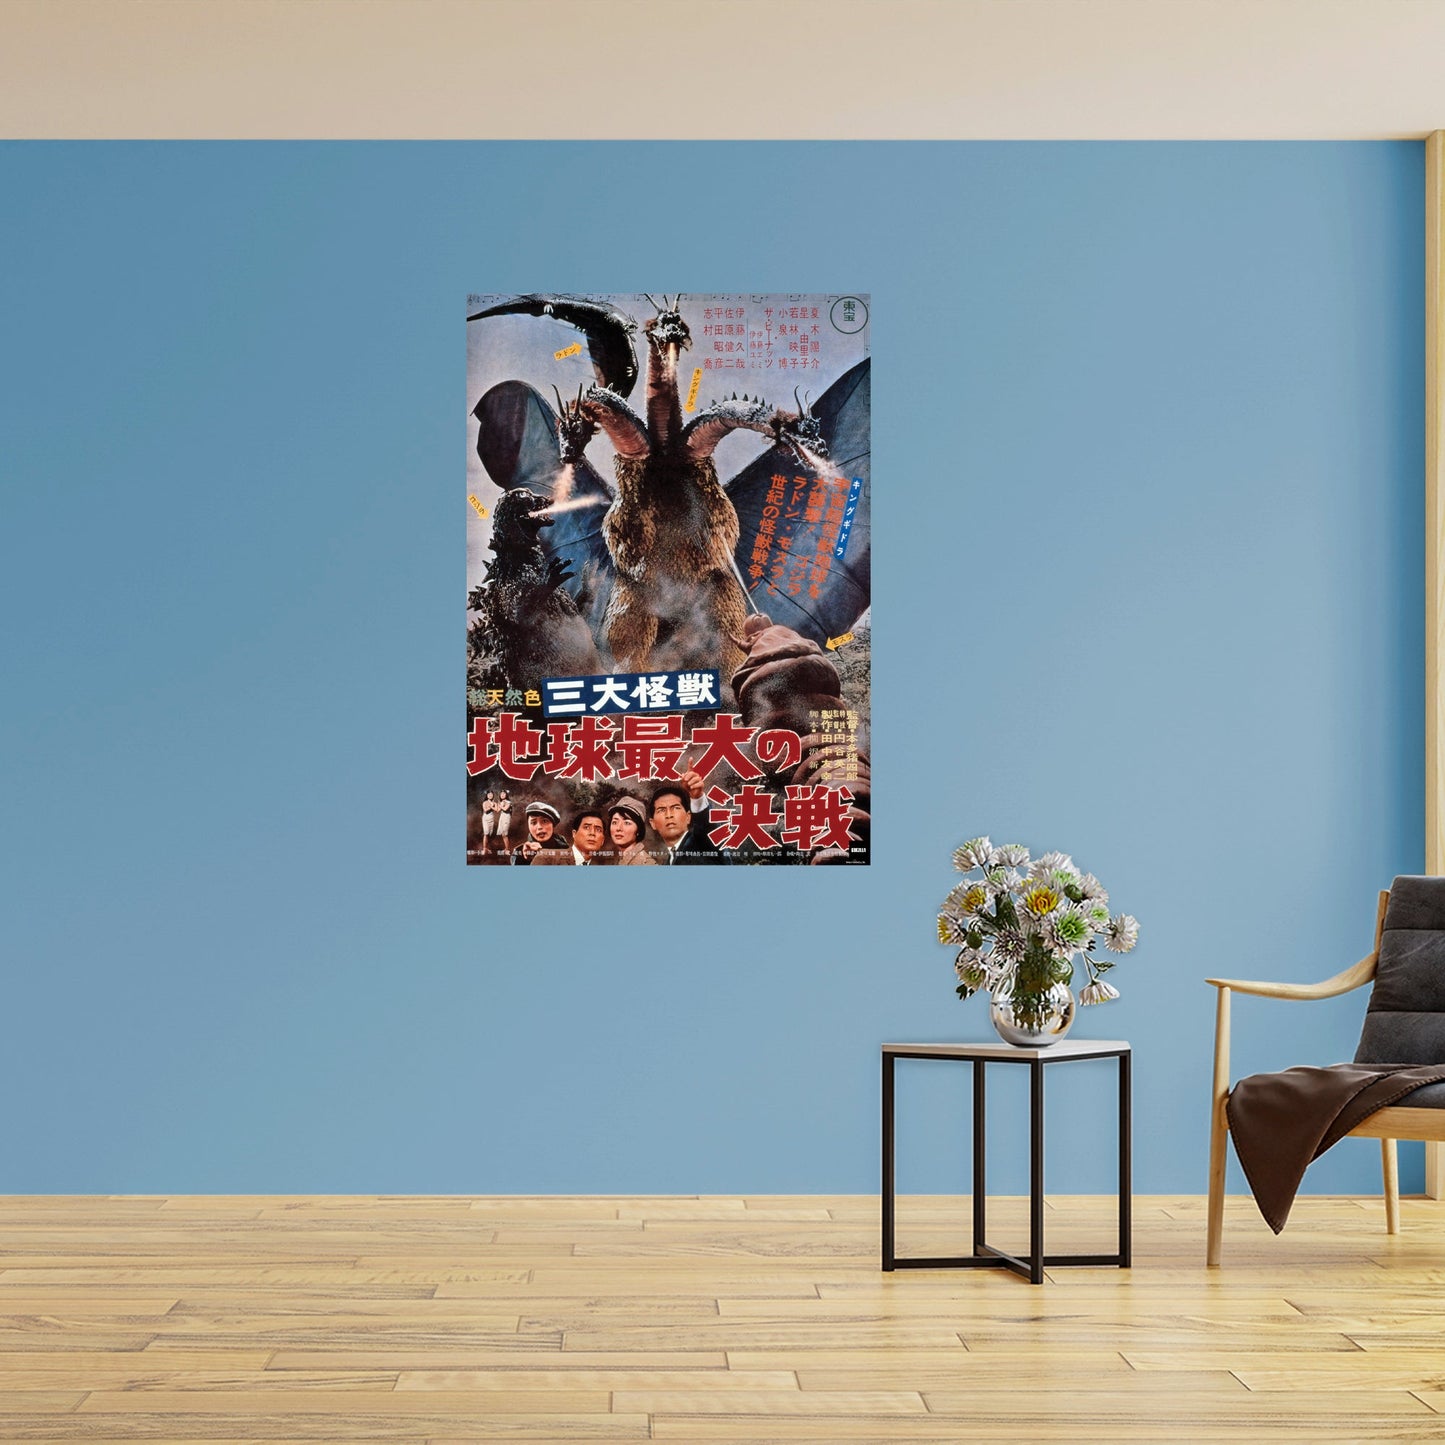 Godzilla: Ghidorah The Three Headed Monster (1964) Movie Poster Mural - Officially Licensed Toho Removable Adhesive Decal